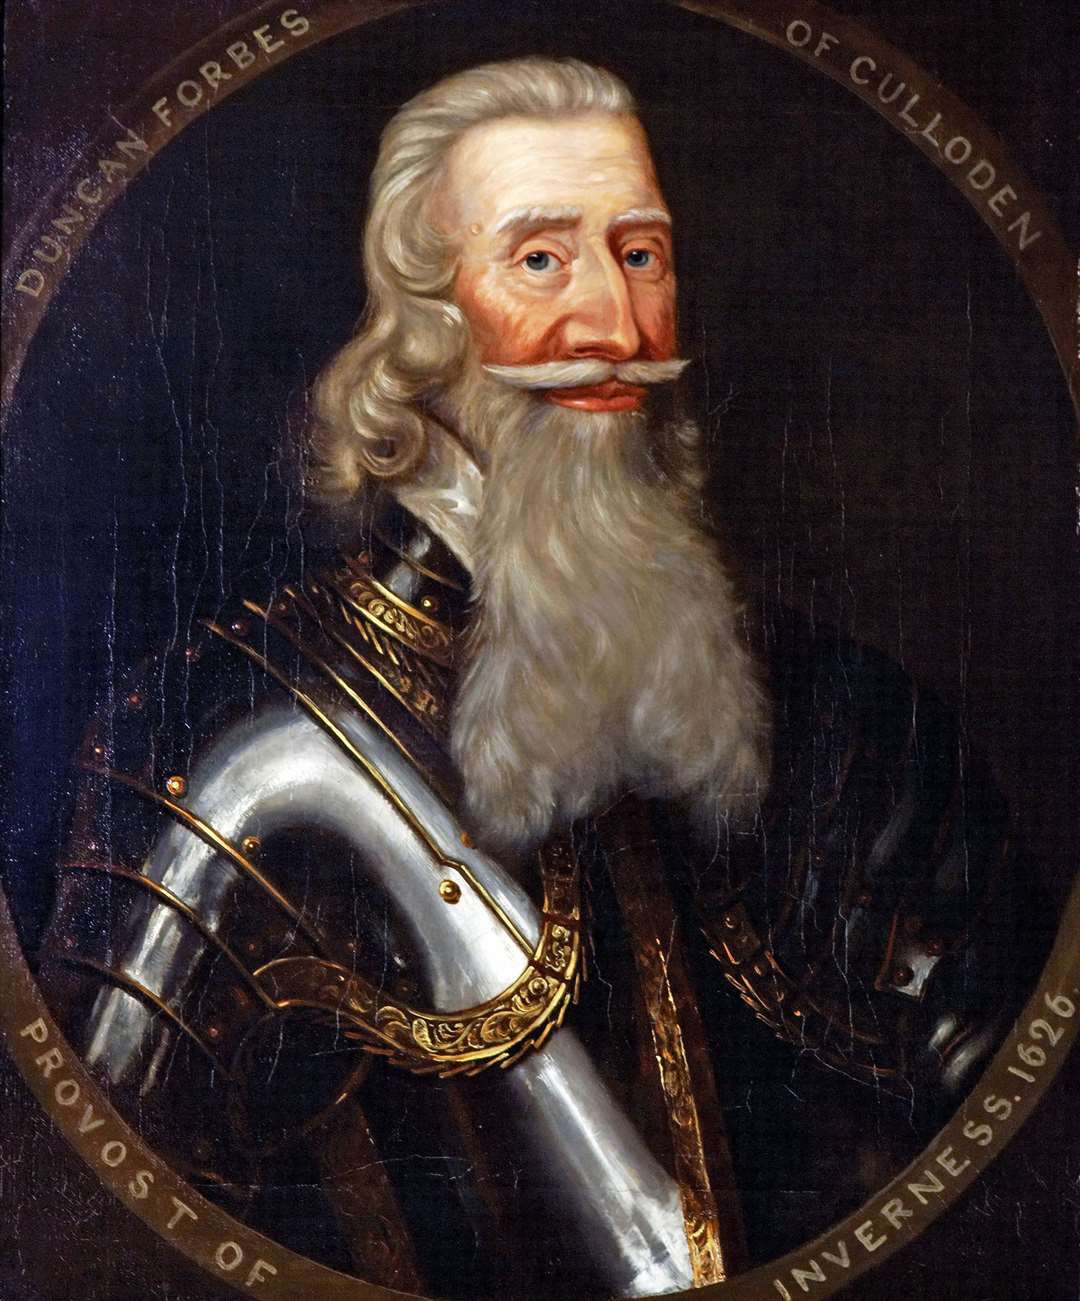 ‘Grey Duncan’, Provost of Inverness, Duncan Forbes’ grandfather.